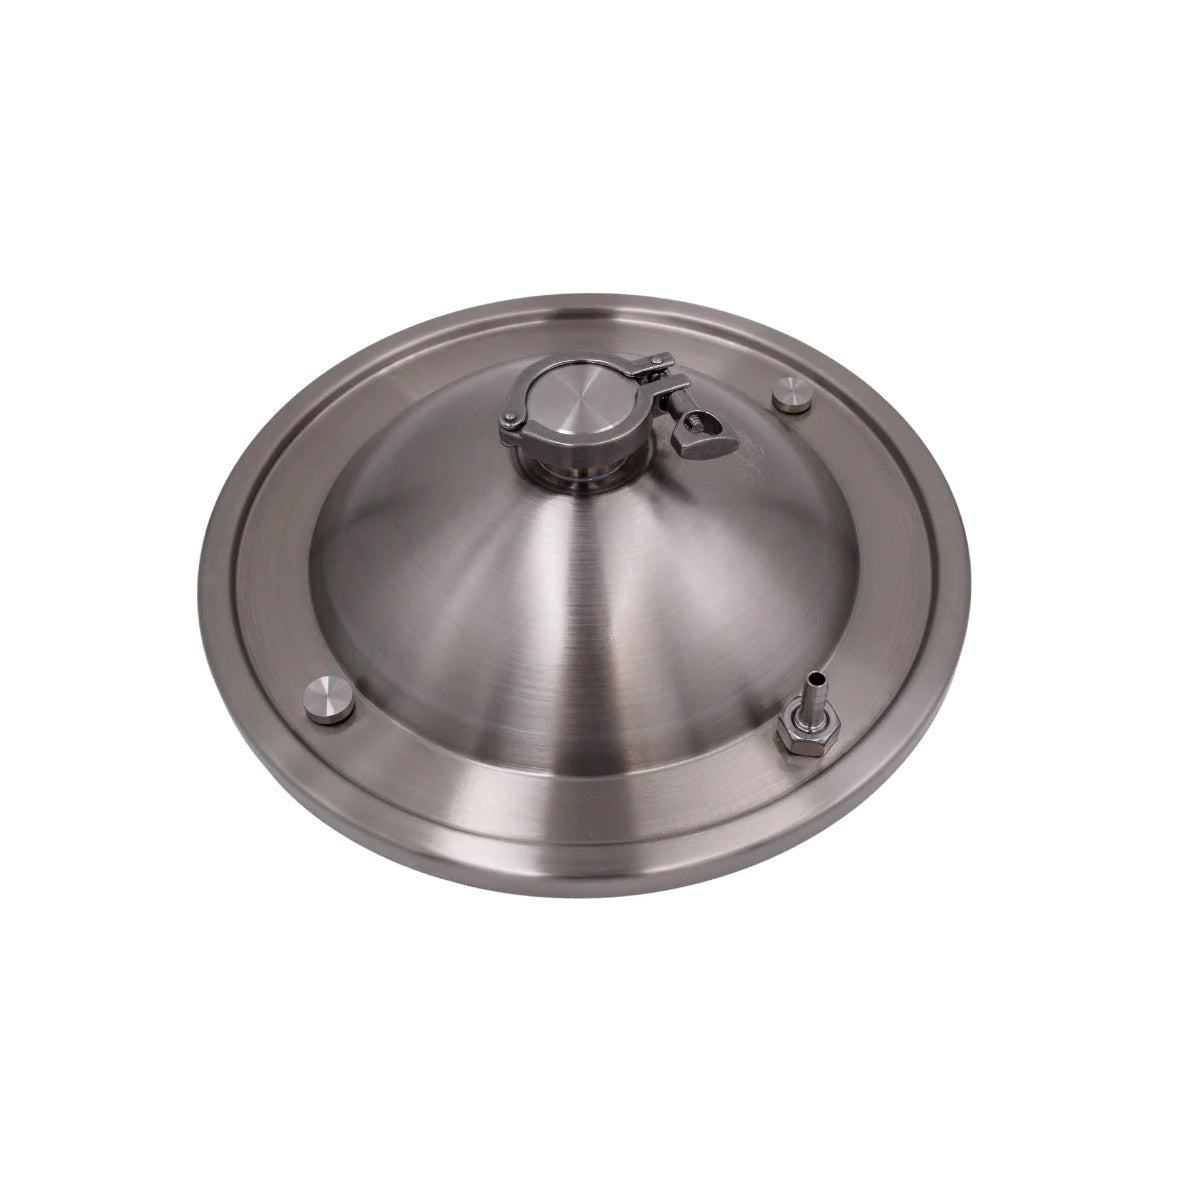 FermTank Lid With 1.5 Tri-Clamp Fitting - Delta Brewing Systems